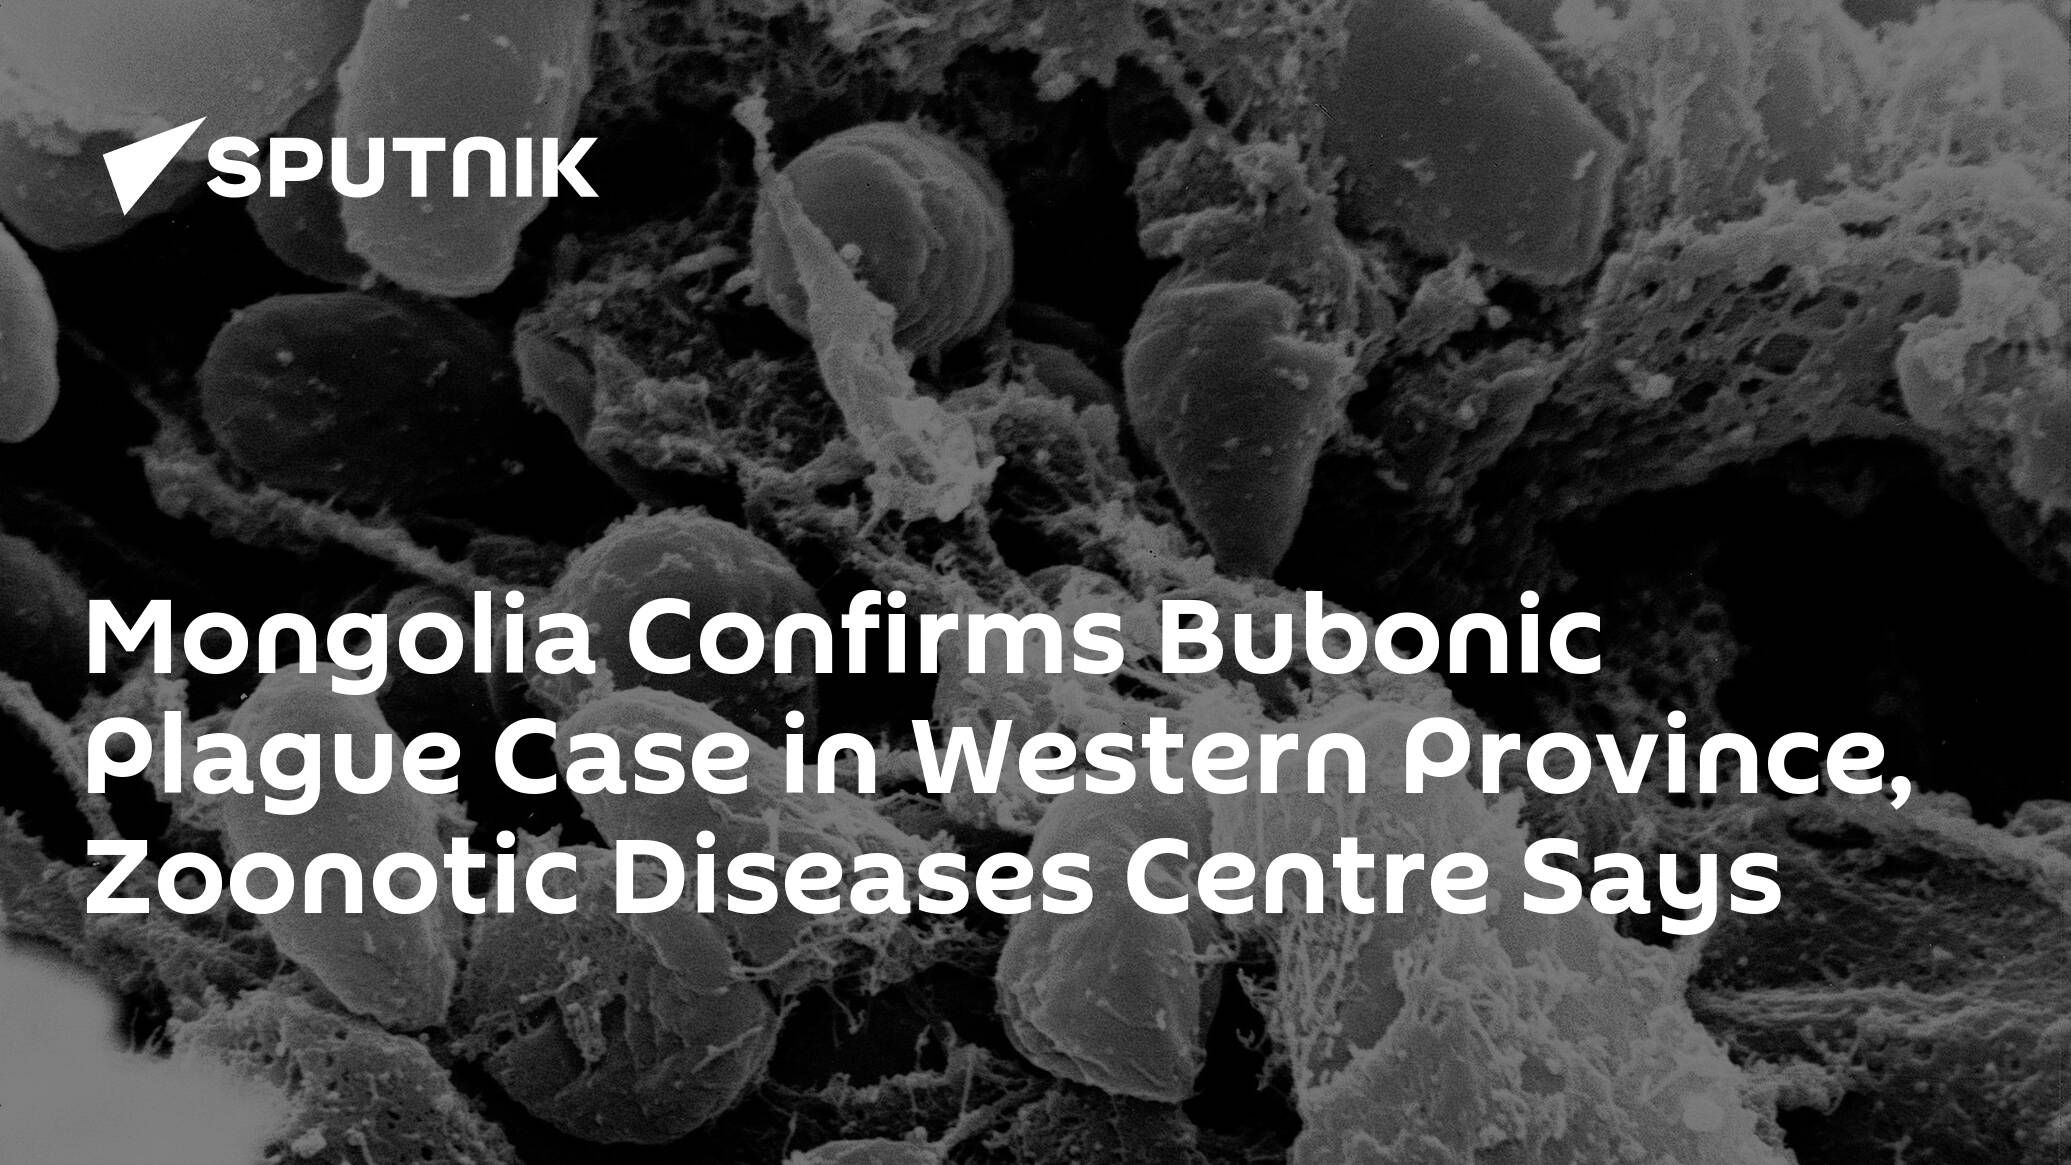 Mongolia Confirms Bubonic Plague Case in Western Province, Zoonotic